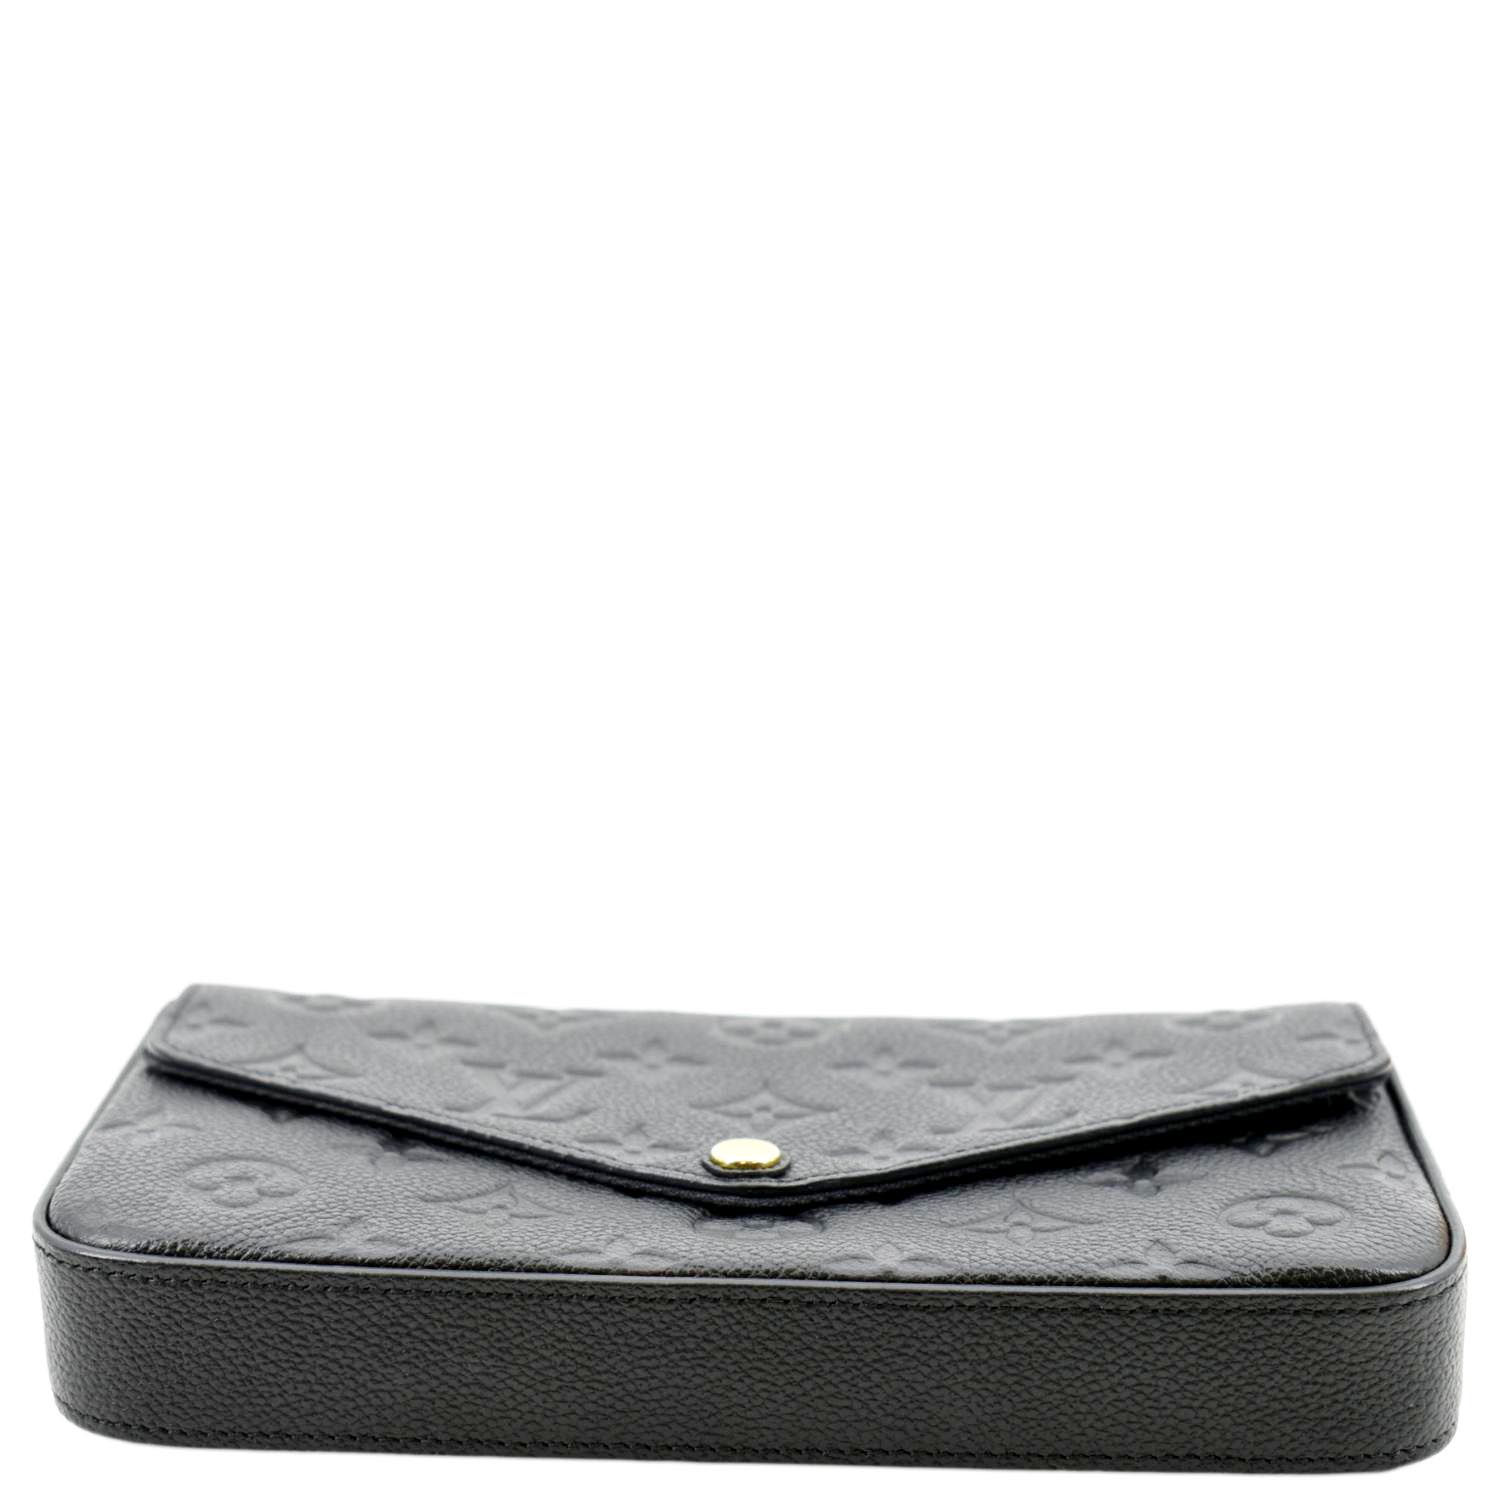 Shoulder Bag And Pouch FELICIE POCHETTE Dove Grey Empreinte Leather With  Bold Cream Flower Print Envelope Detachable Black Gold Chain 3 Multi Clutch POCHETTE  FELICIE 69977 From Bagbag051, $28.36